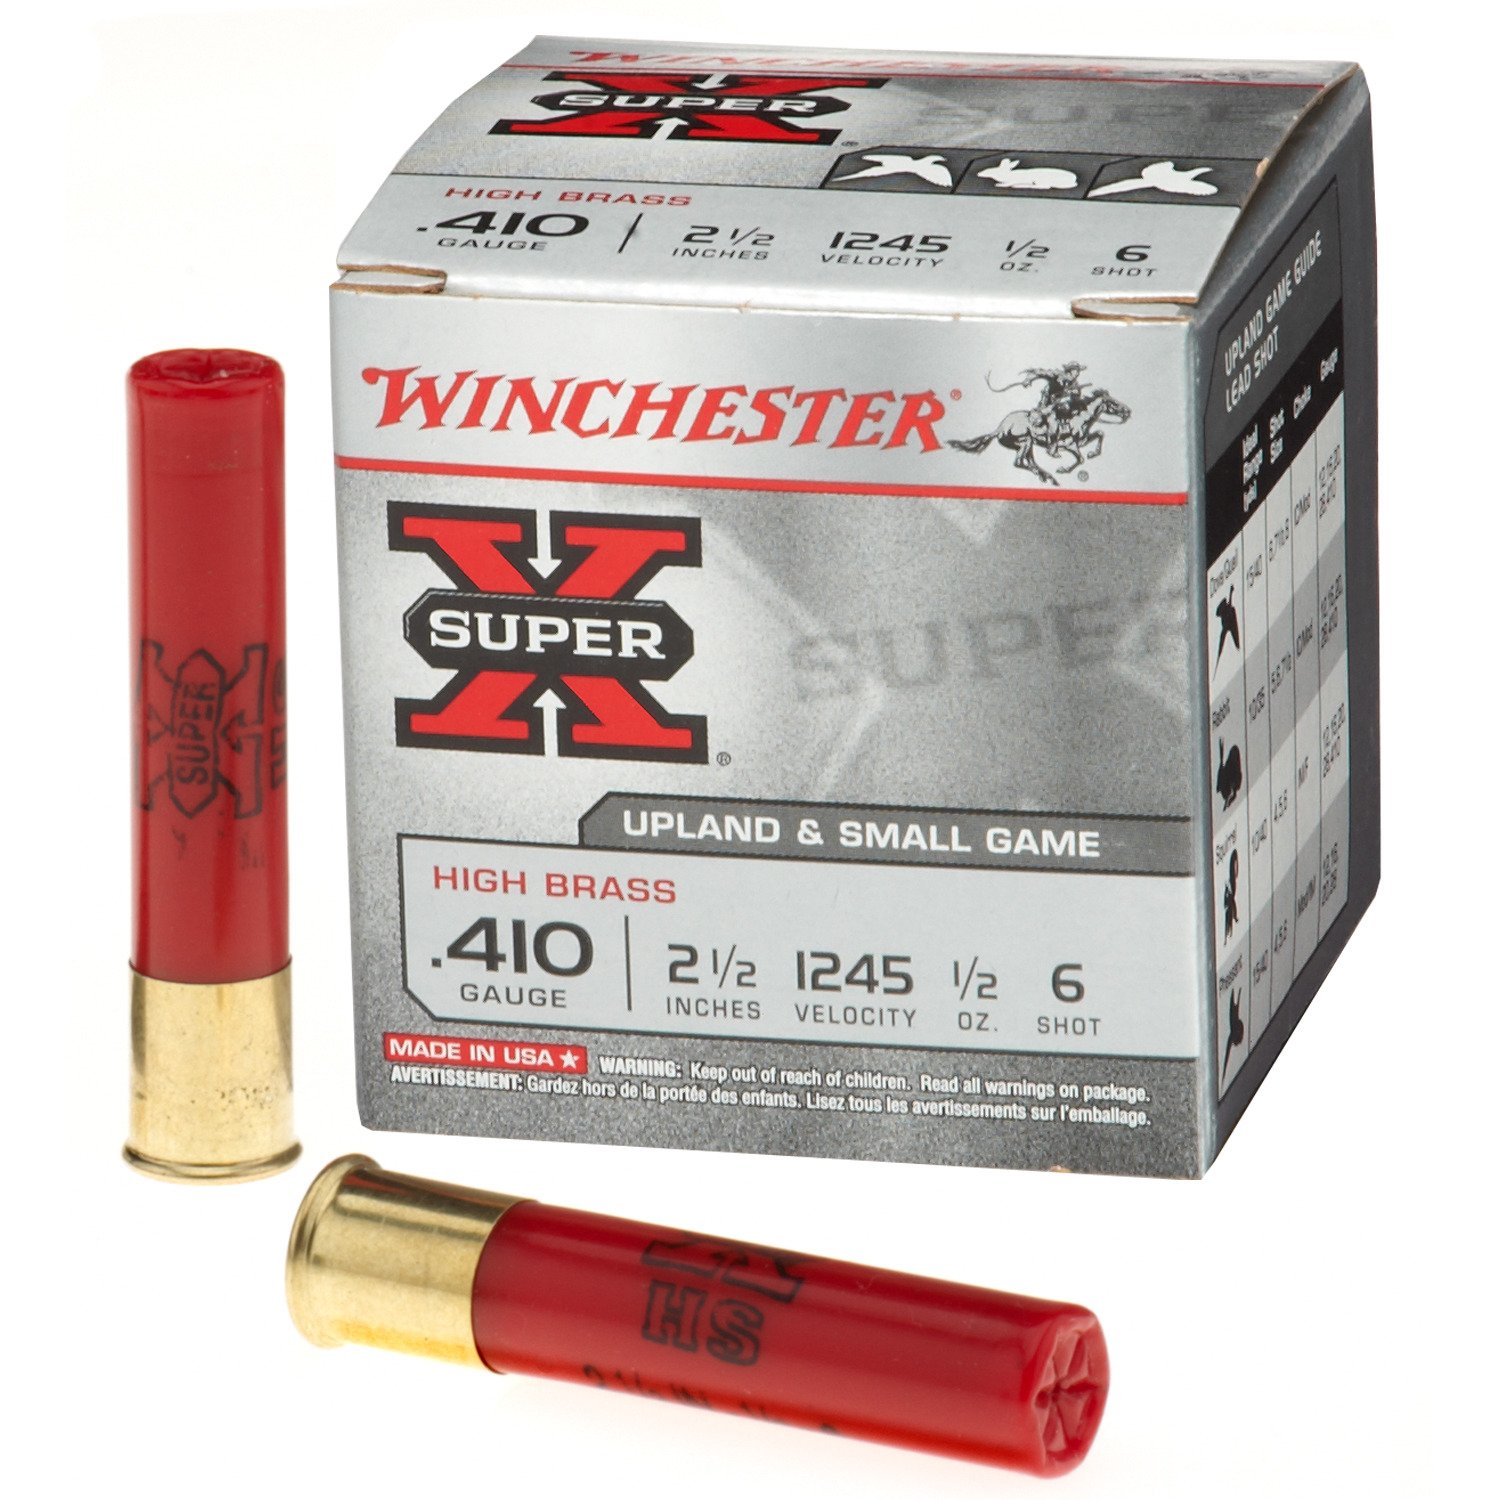 winchester-super-x-game-load-hs-410-shotshells-25-rounds-academy